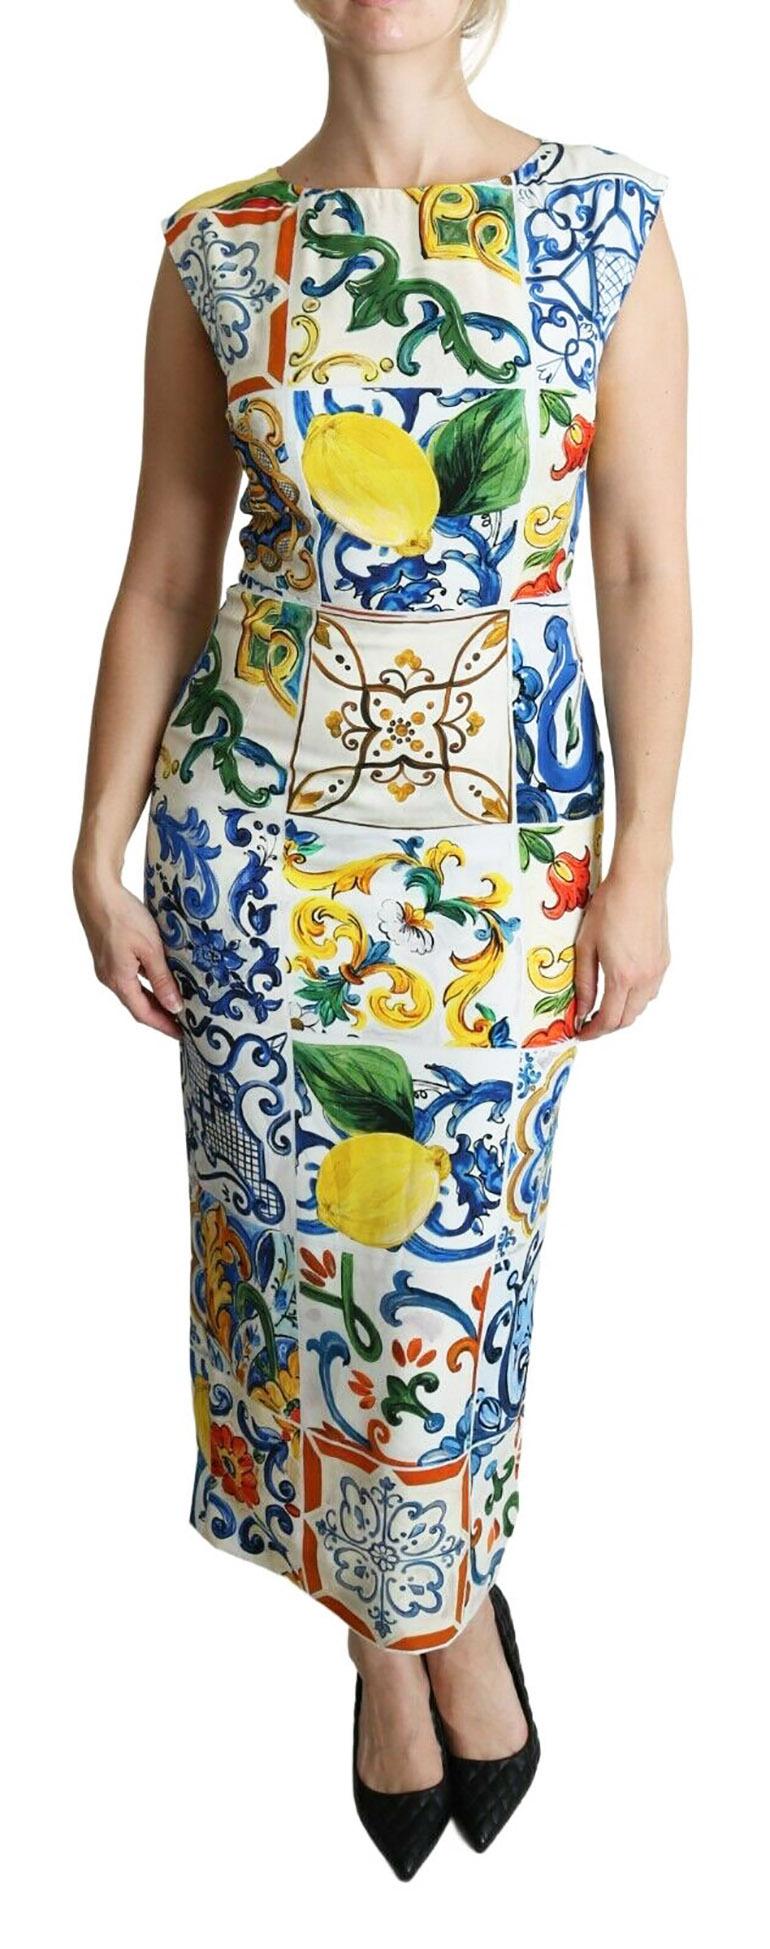 DOLCE & GABBANA

Gorgeous brand new with tags, 100% Authentic Dolce & Gabbana Dress conveys the beautiful blue, yellow and green hues of the Mediterranean, fashioned from native rustic floral Majolica tile print for a colourful touch. 

Model: